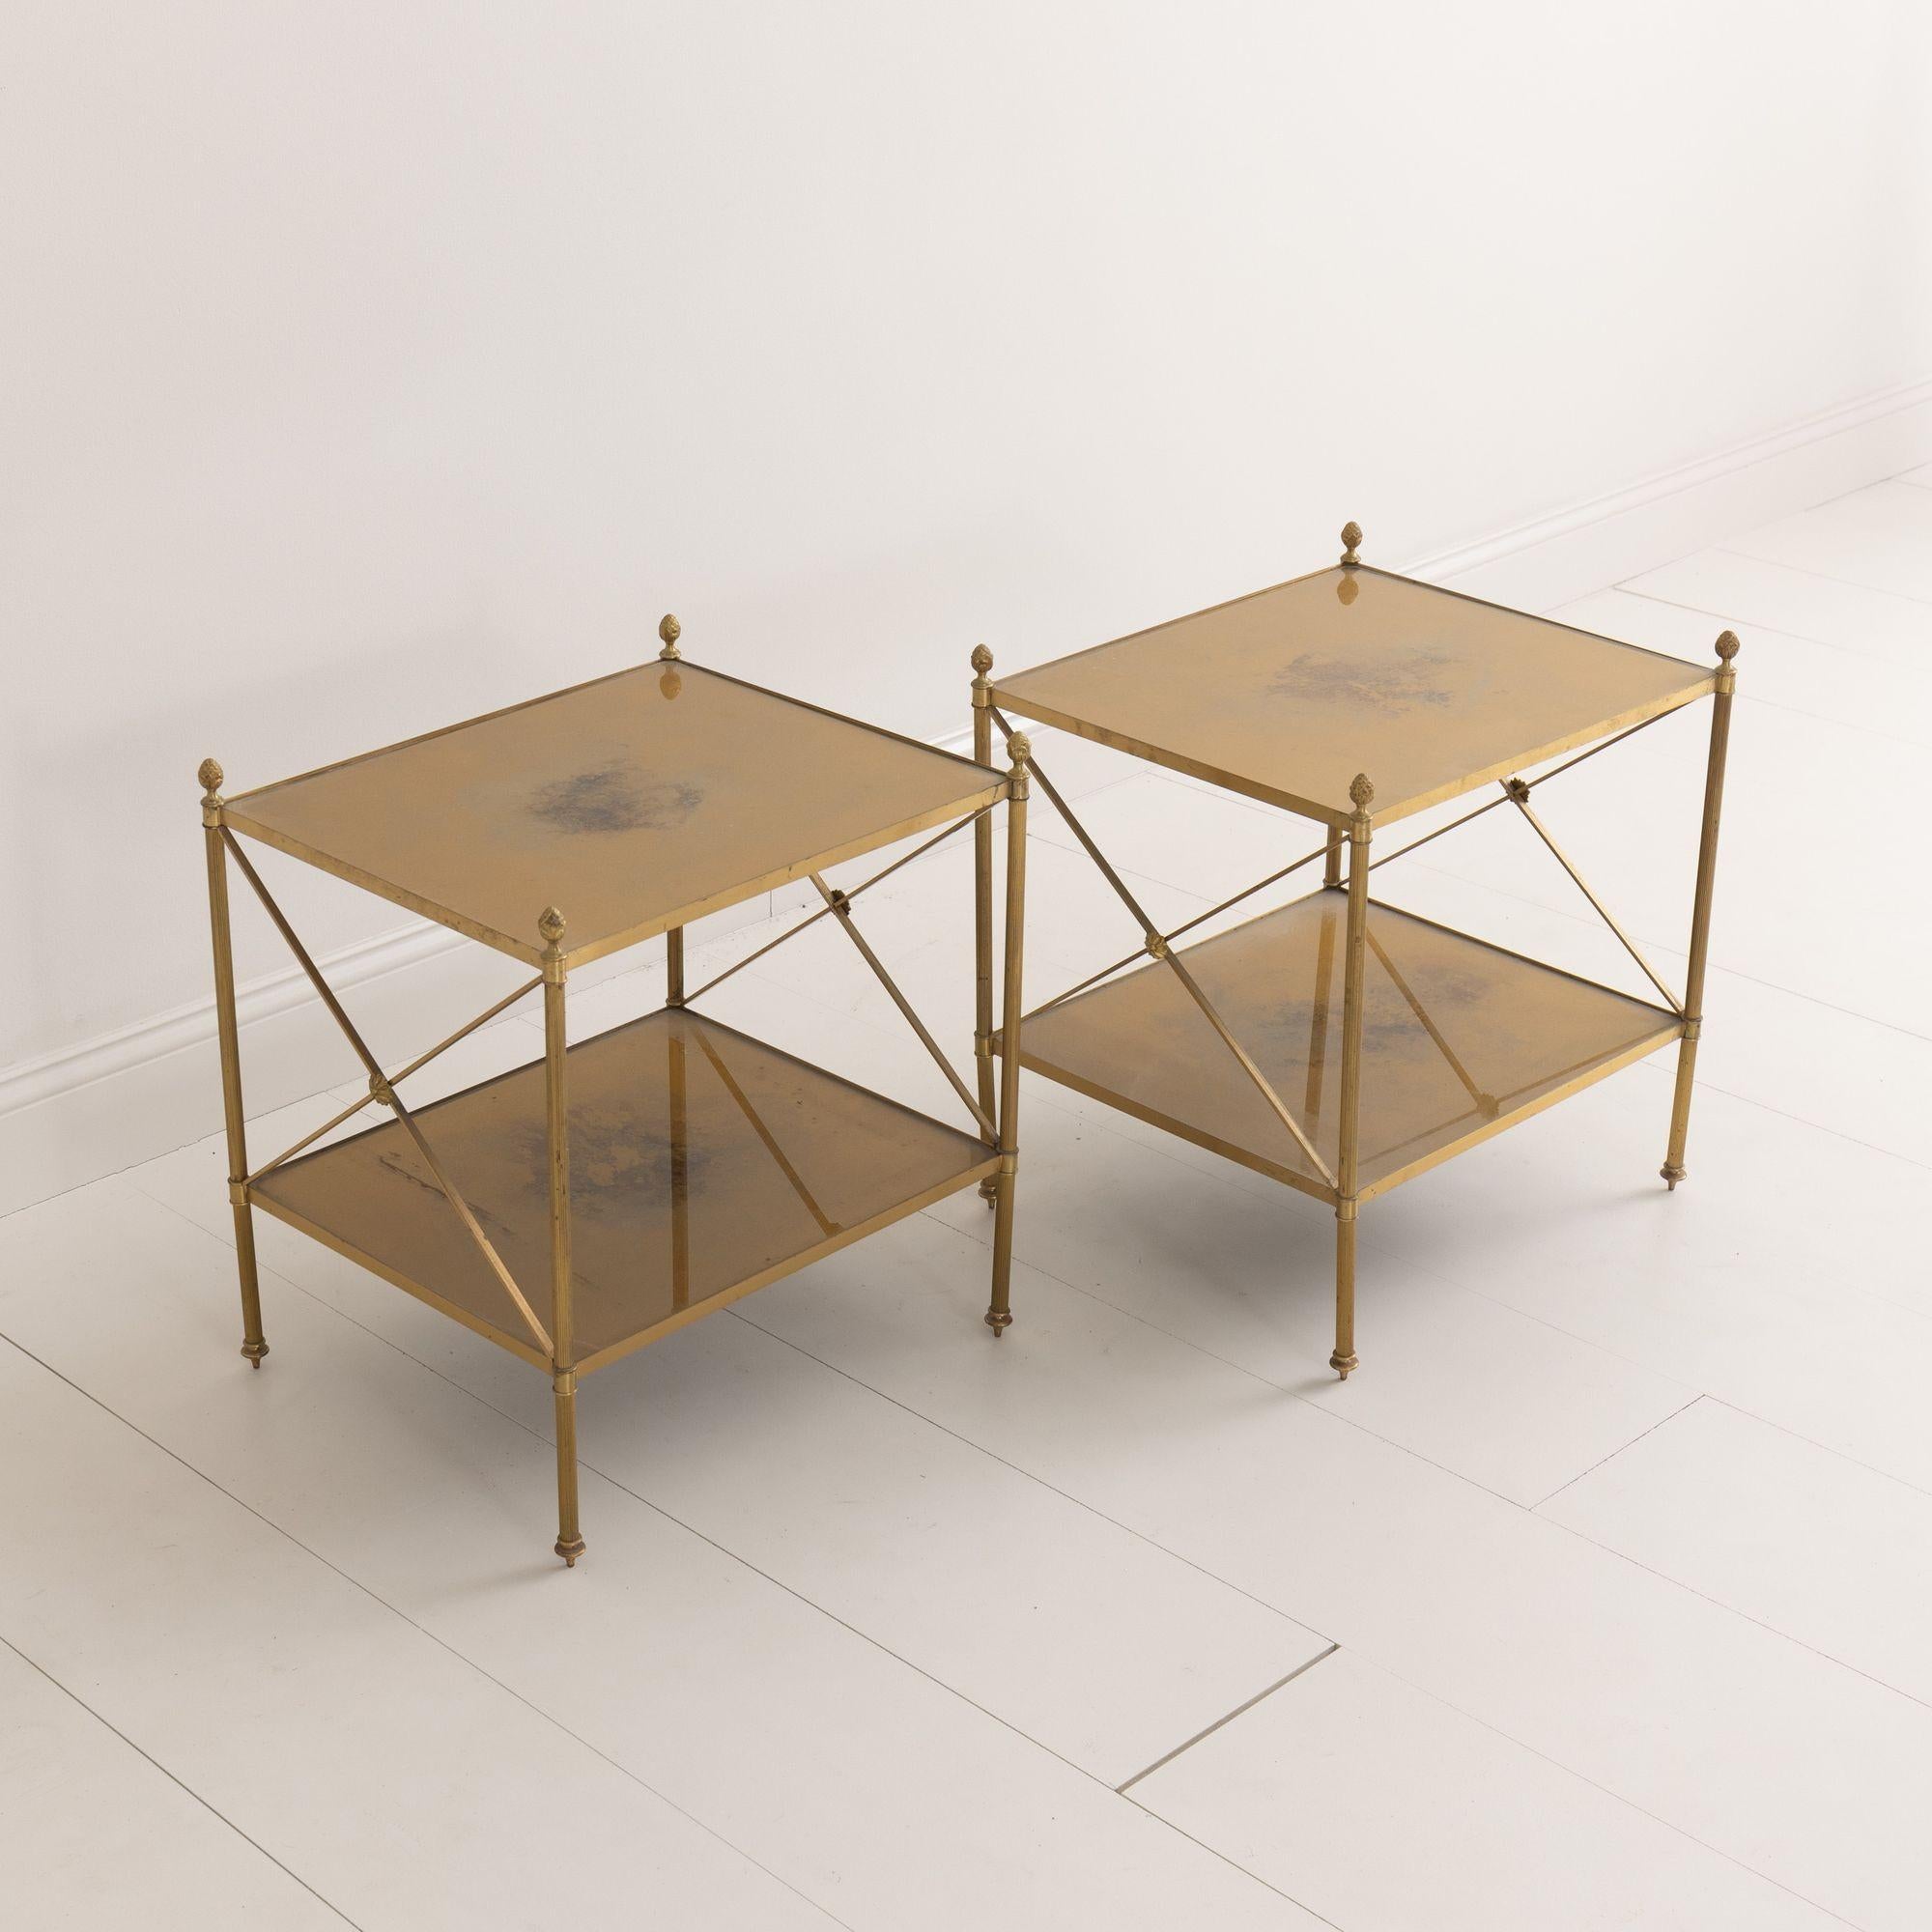 A beautiful pair of two-tiered brass side tables attributed to Maison Jansen with gold églomisé glass shelves. These neoclassical style tables have finely fluted legs with finials on each corner post and medallions on each side.  The height of the